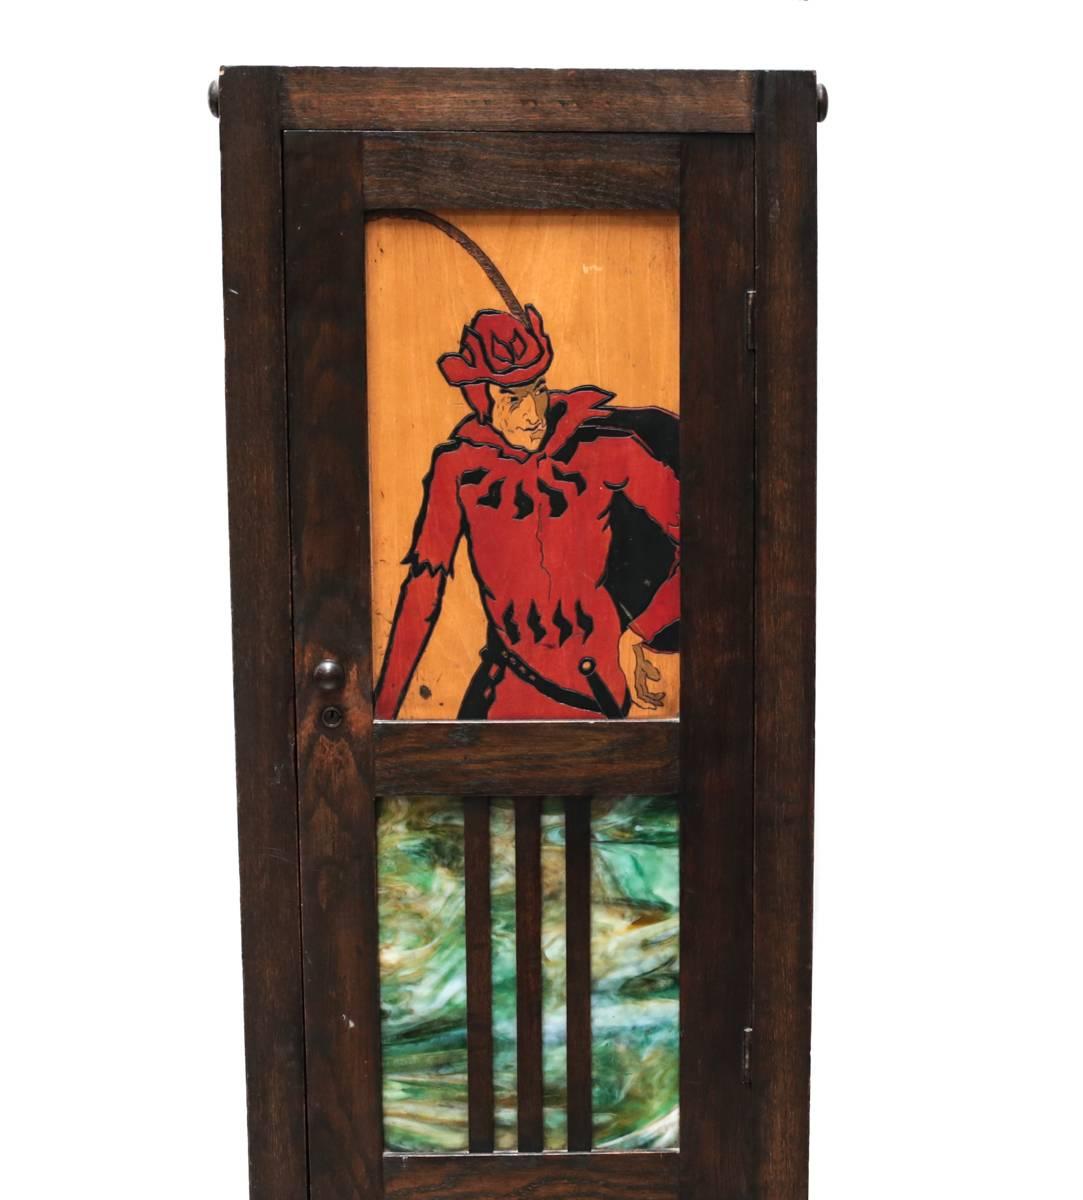 An unusual early 20th century stained oak cabinet, the front door set with a colorful slag glass panel and with a painted and engraved figural depiction of a musketeer or Robin Hood type on an inset panel of maple wood. 

Opens to reveal a three